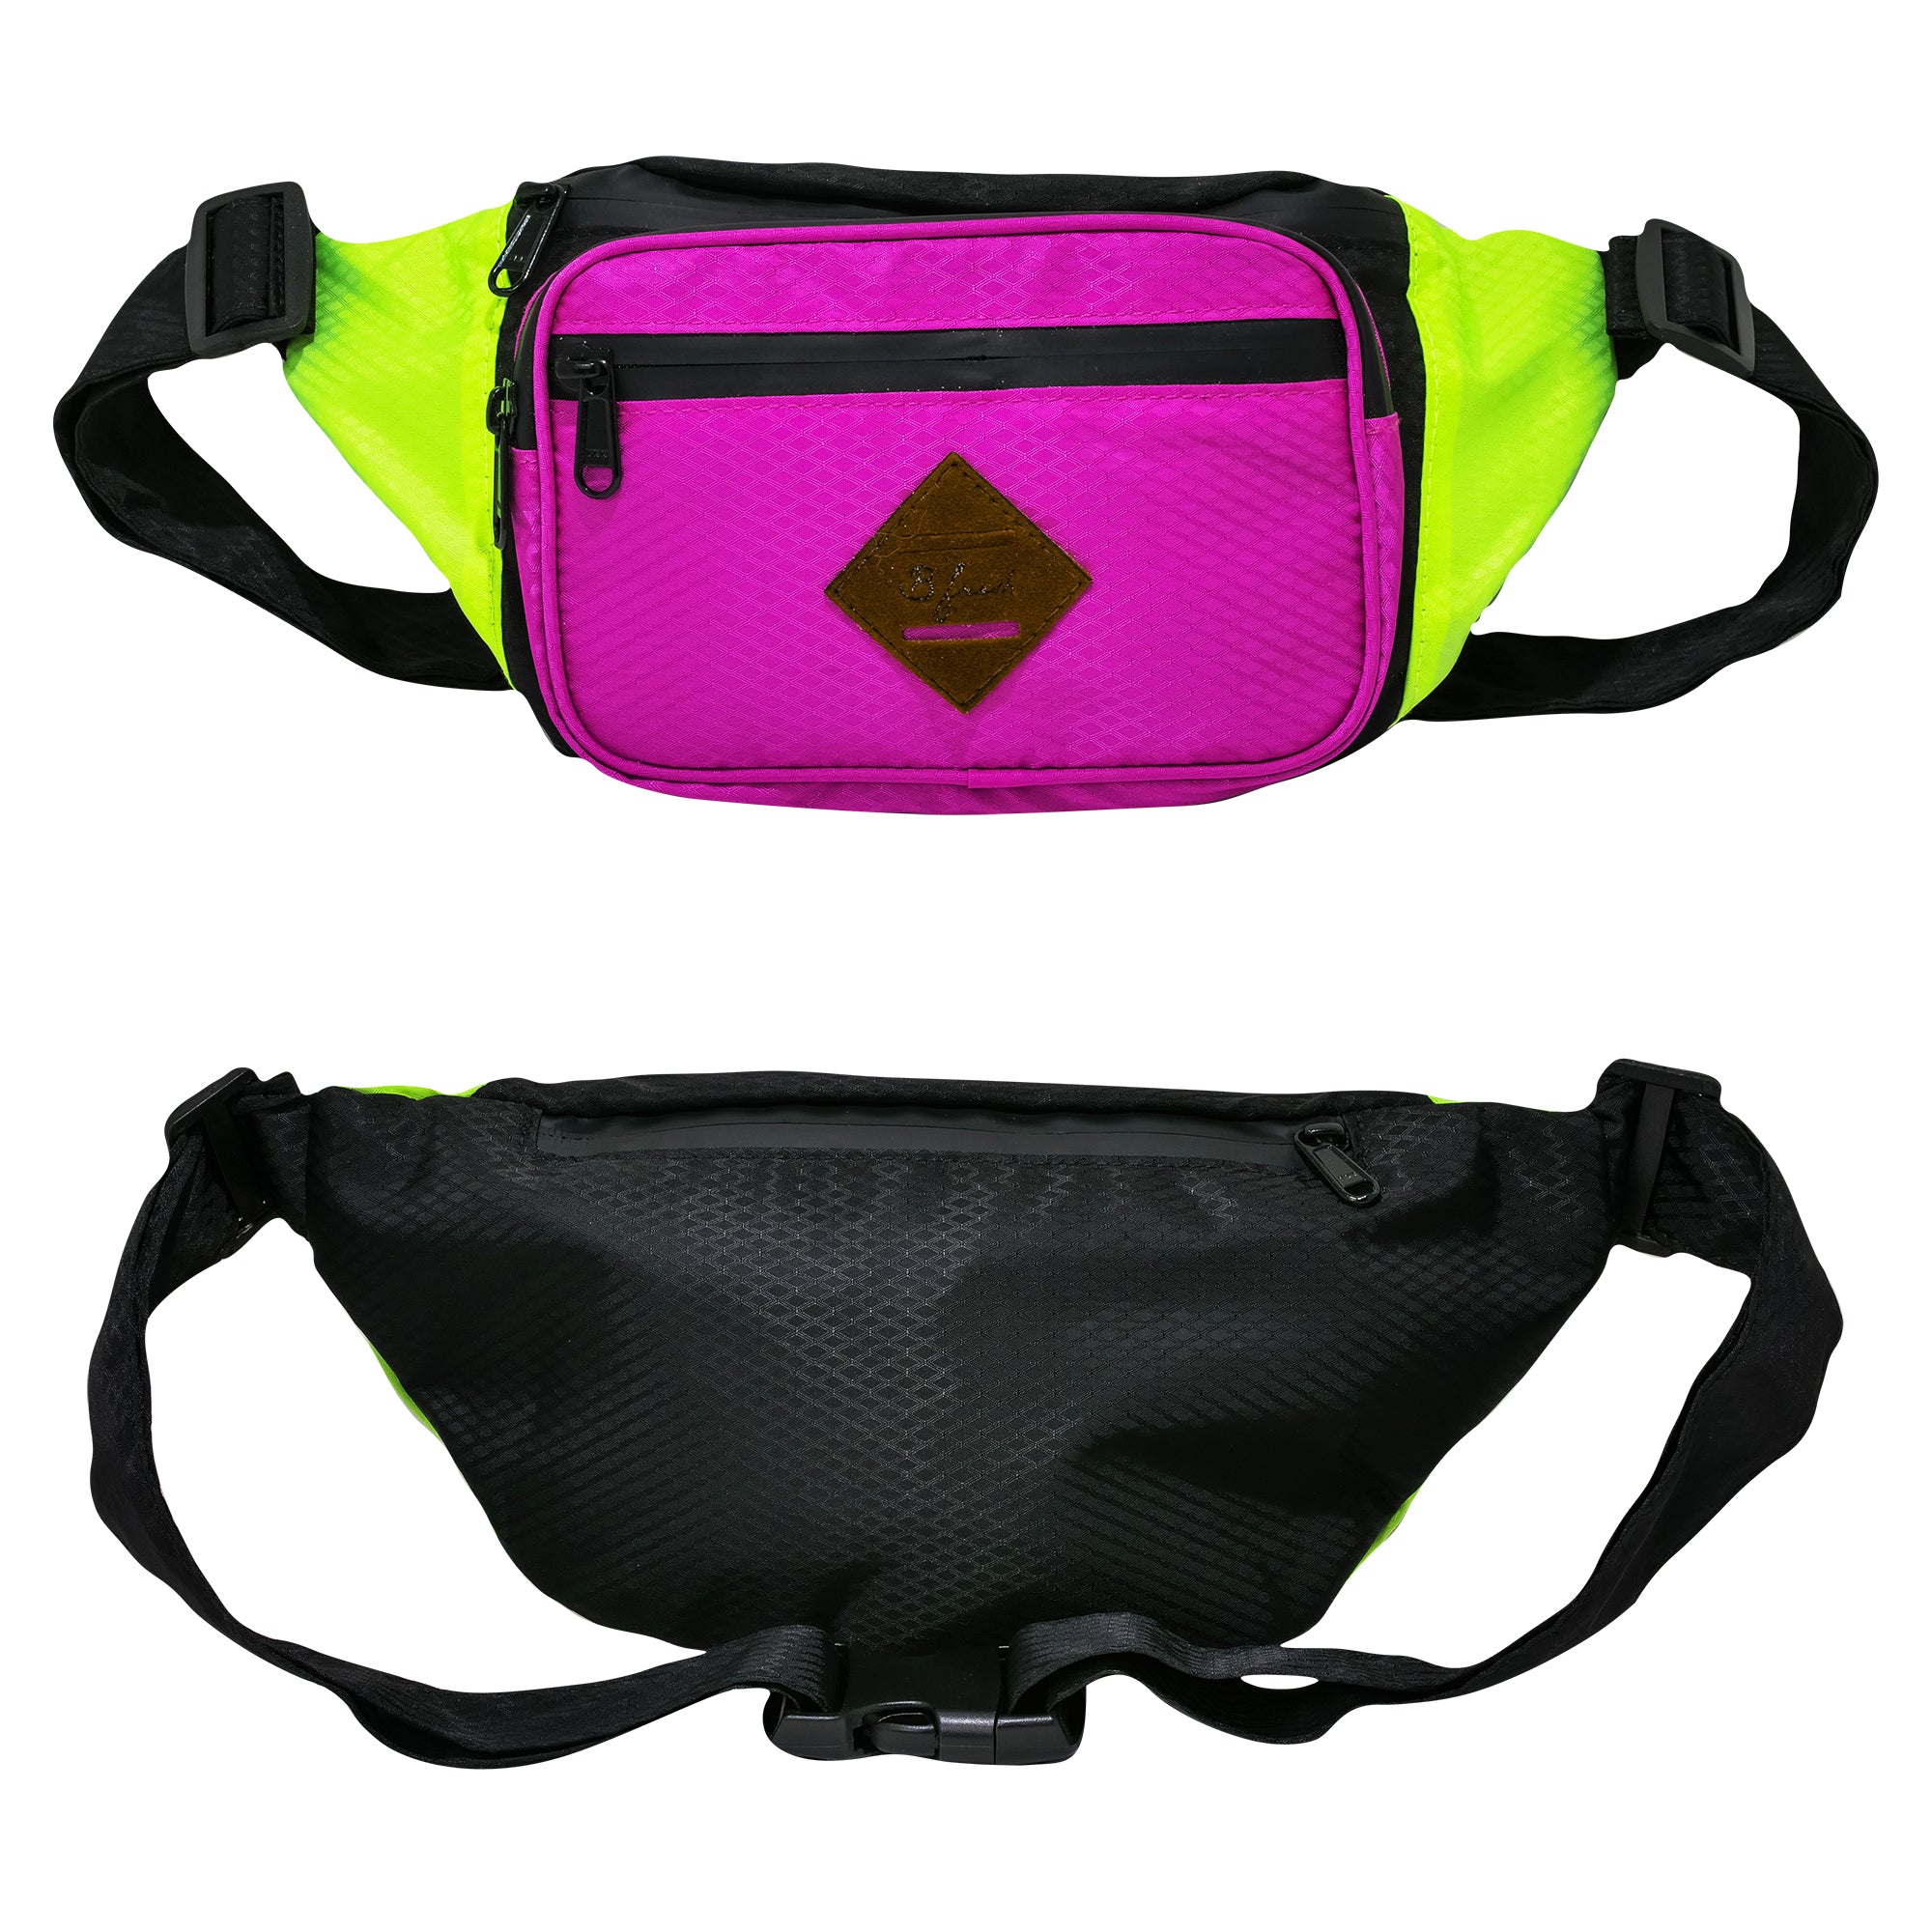 80's Ski Party Water Resistant Fanny Pack - 4 pocket fanny pack bum bag with waterproof material water resistant zippers 4 pouches. With vintage throwback pink bright green and black ski party design. B Fresh Gear